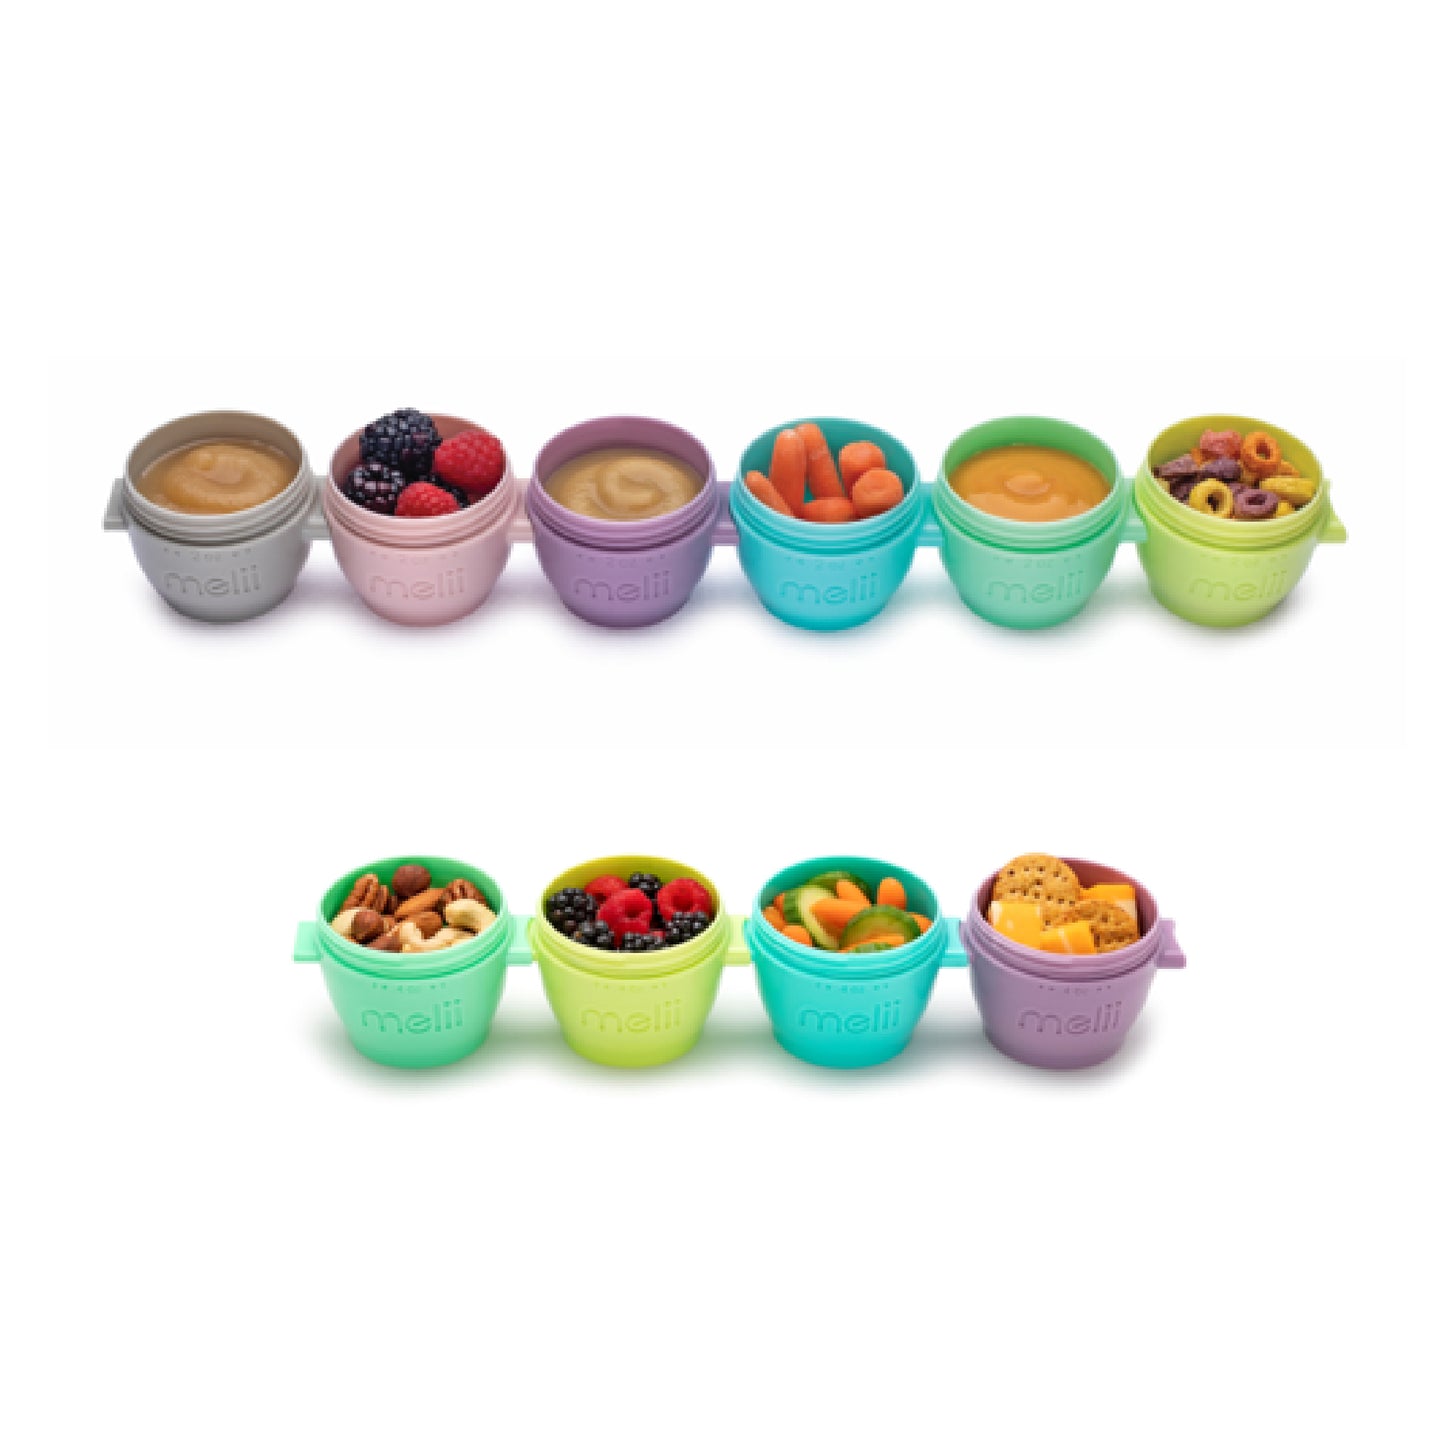 Melii Snap & Go Pods - Airtight & Leakproof Baby Food Containers - Baby Food Storage Pods for Effortless Mealtime, 2oz, set of 6 +  4oz, set of 4